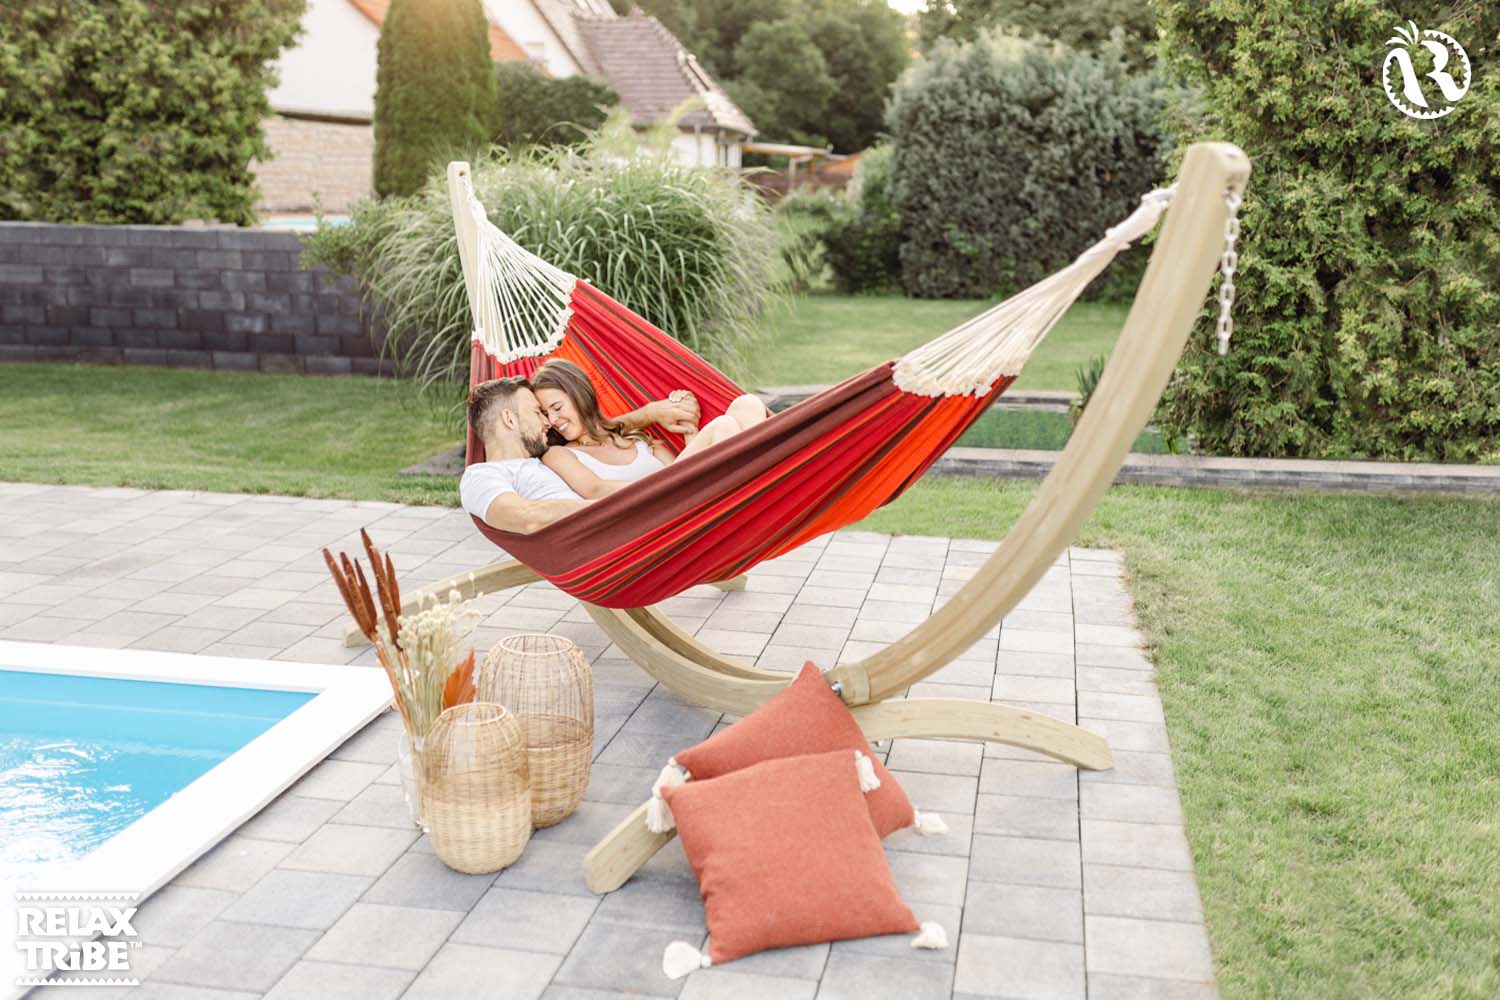 olymp-fsc-wood-xl-stand-for-hammock-length-300-360cm-max-200kg-home-garden-natural-and-paradiso-terracotta